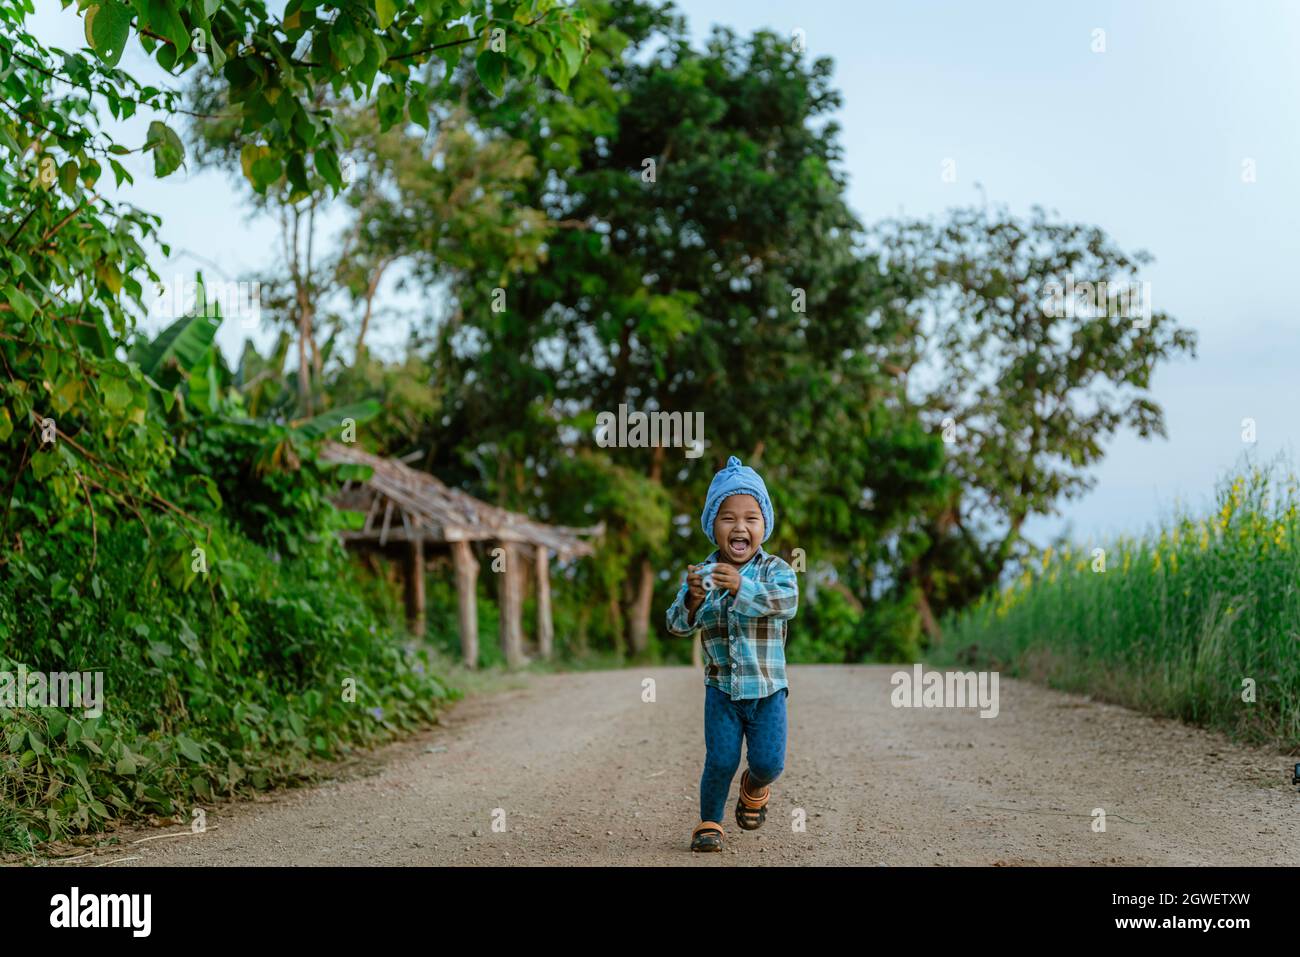 Portrait Of Happy Boy Walking On Country Road Stock Photo